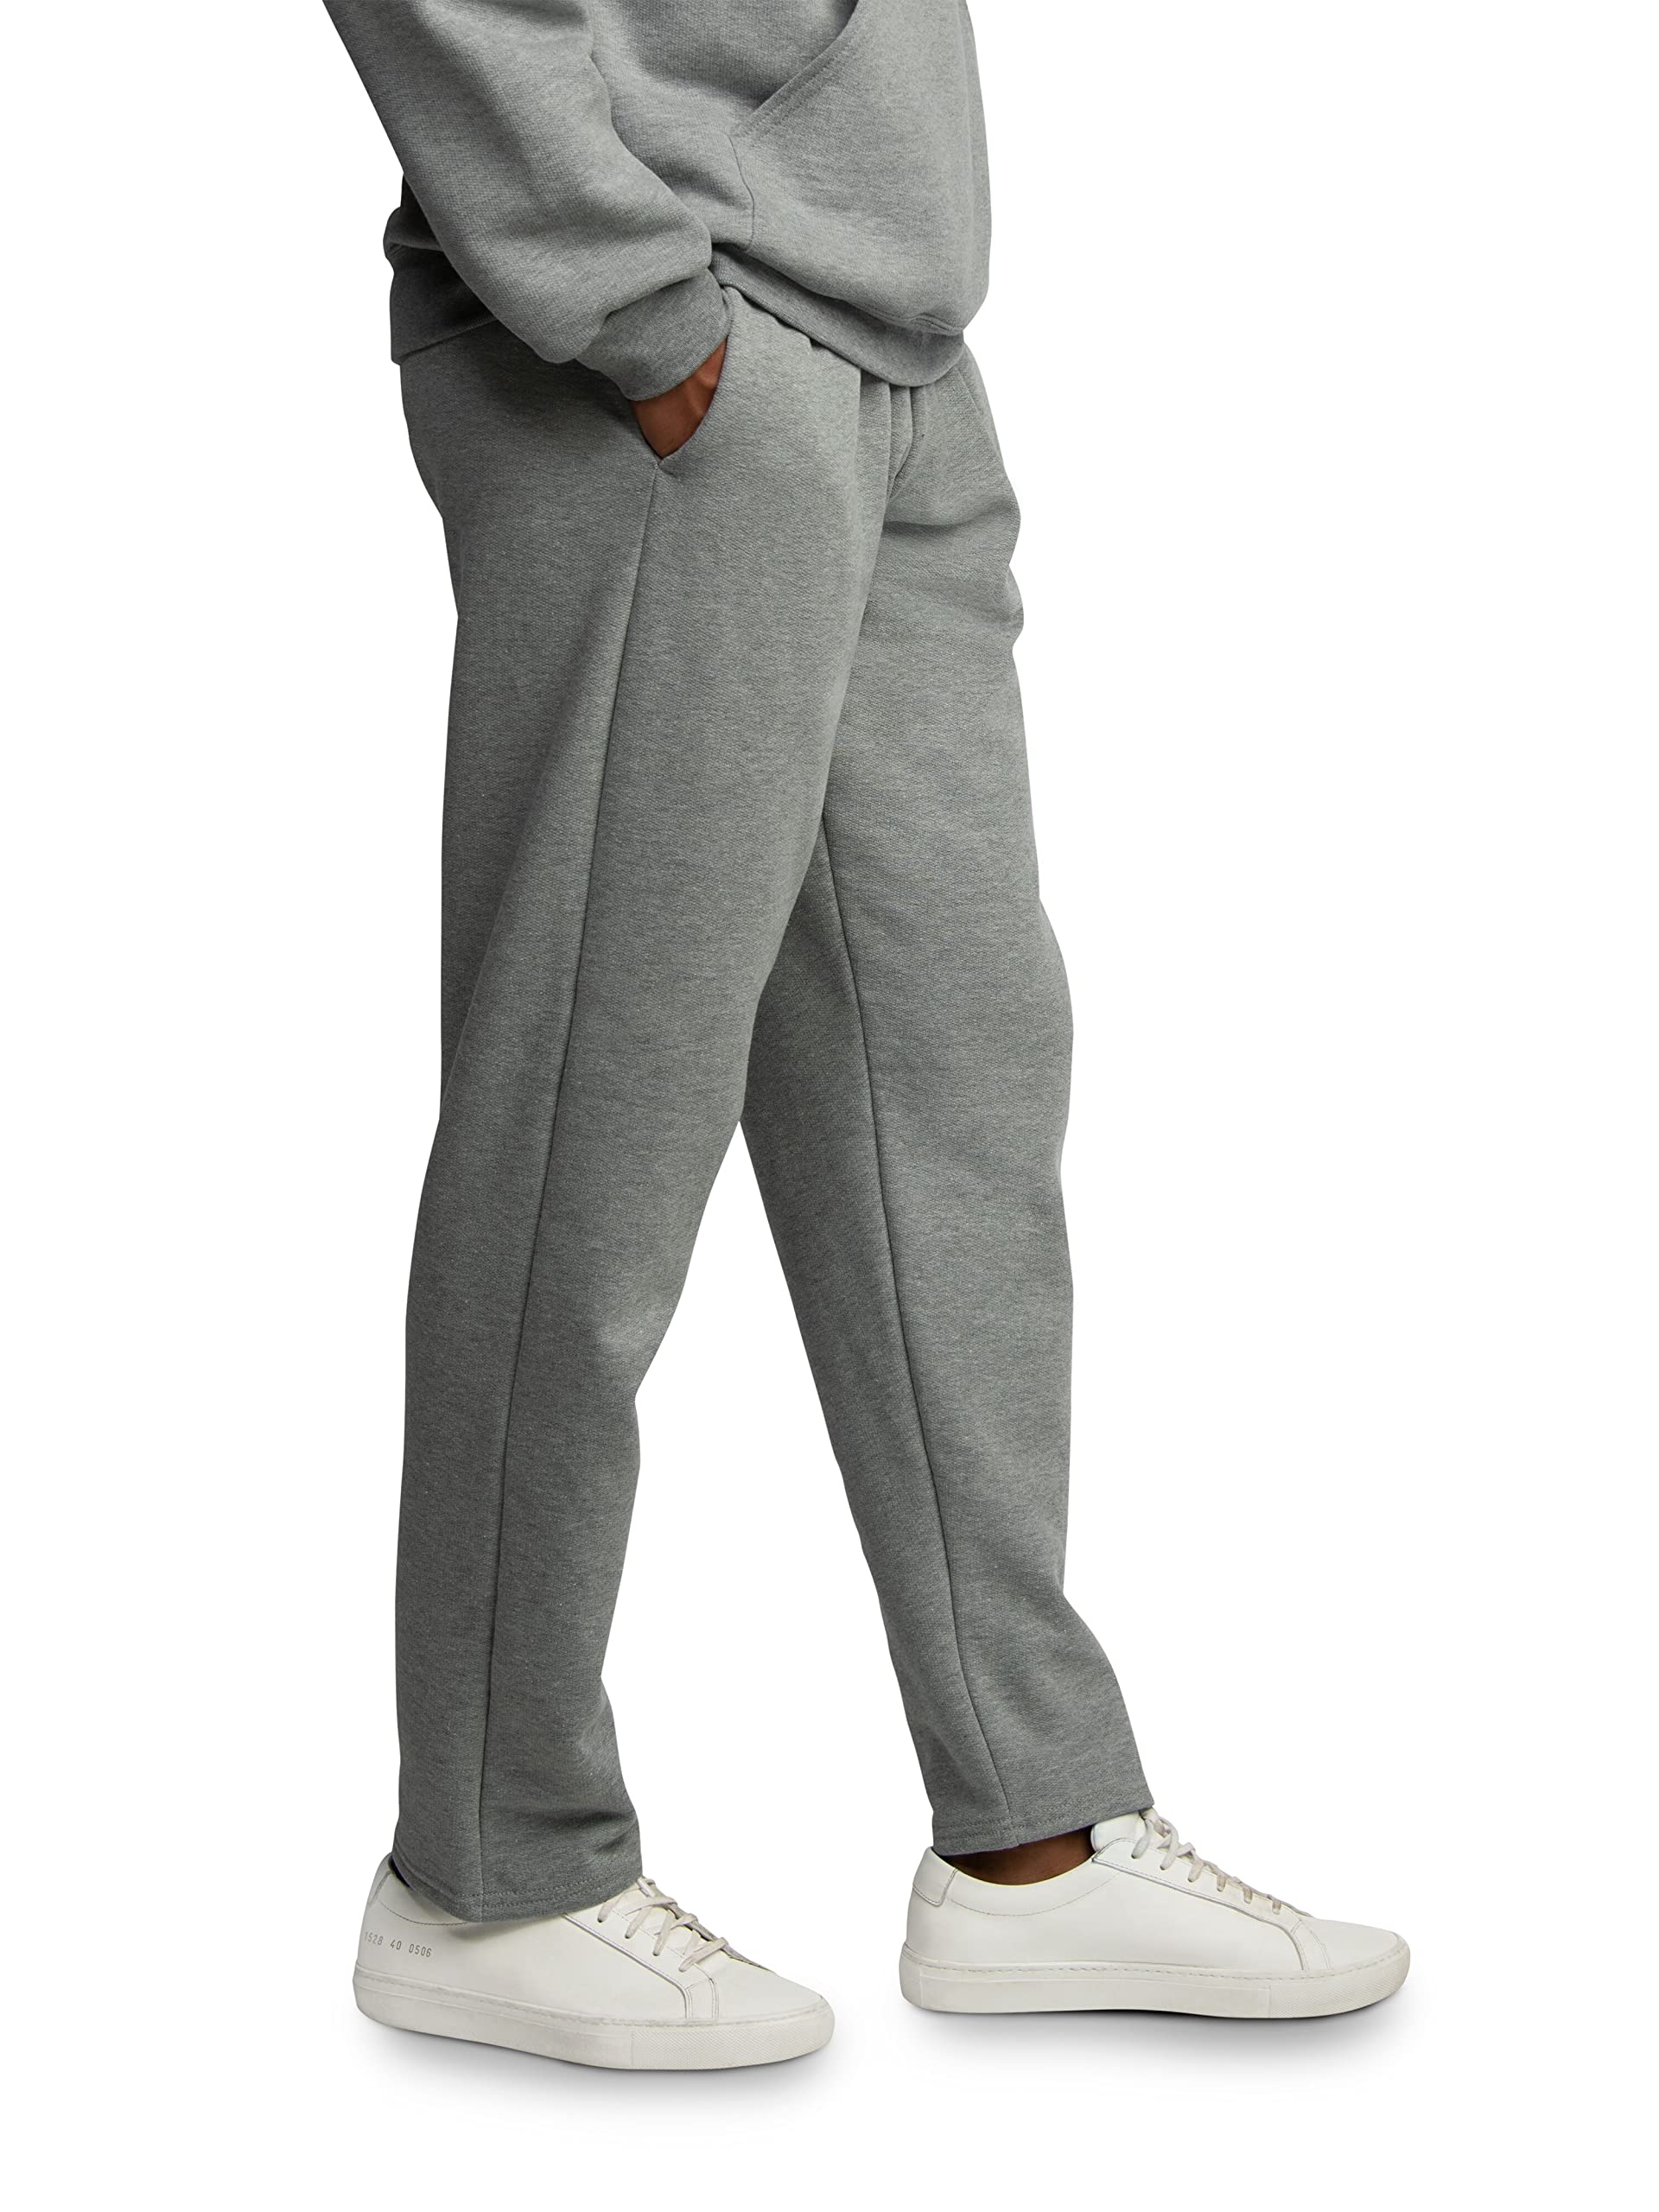 Fruit of the Loom Eversoft Fleece Open Bottom Sweatpants with Pockets, Relaxed Fit, Moisture Wicking, Breathable